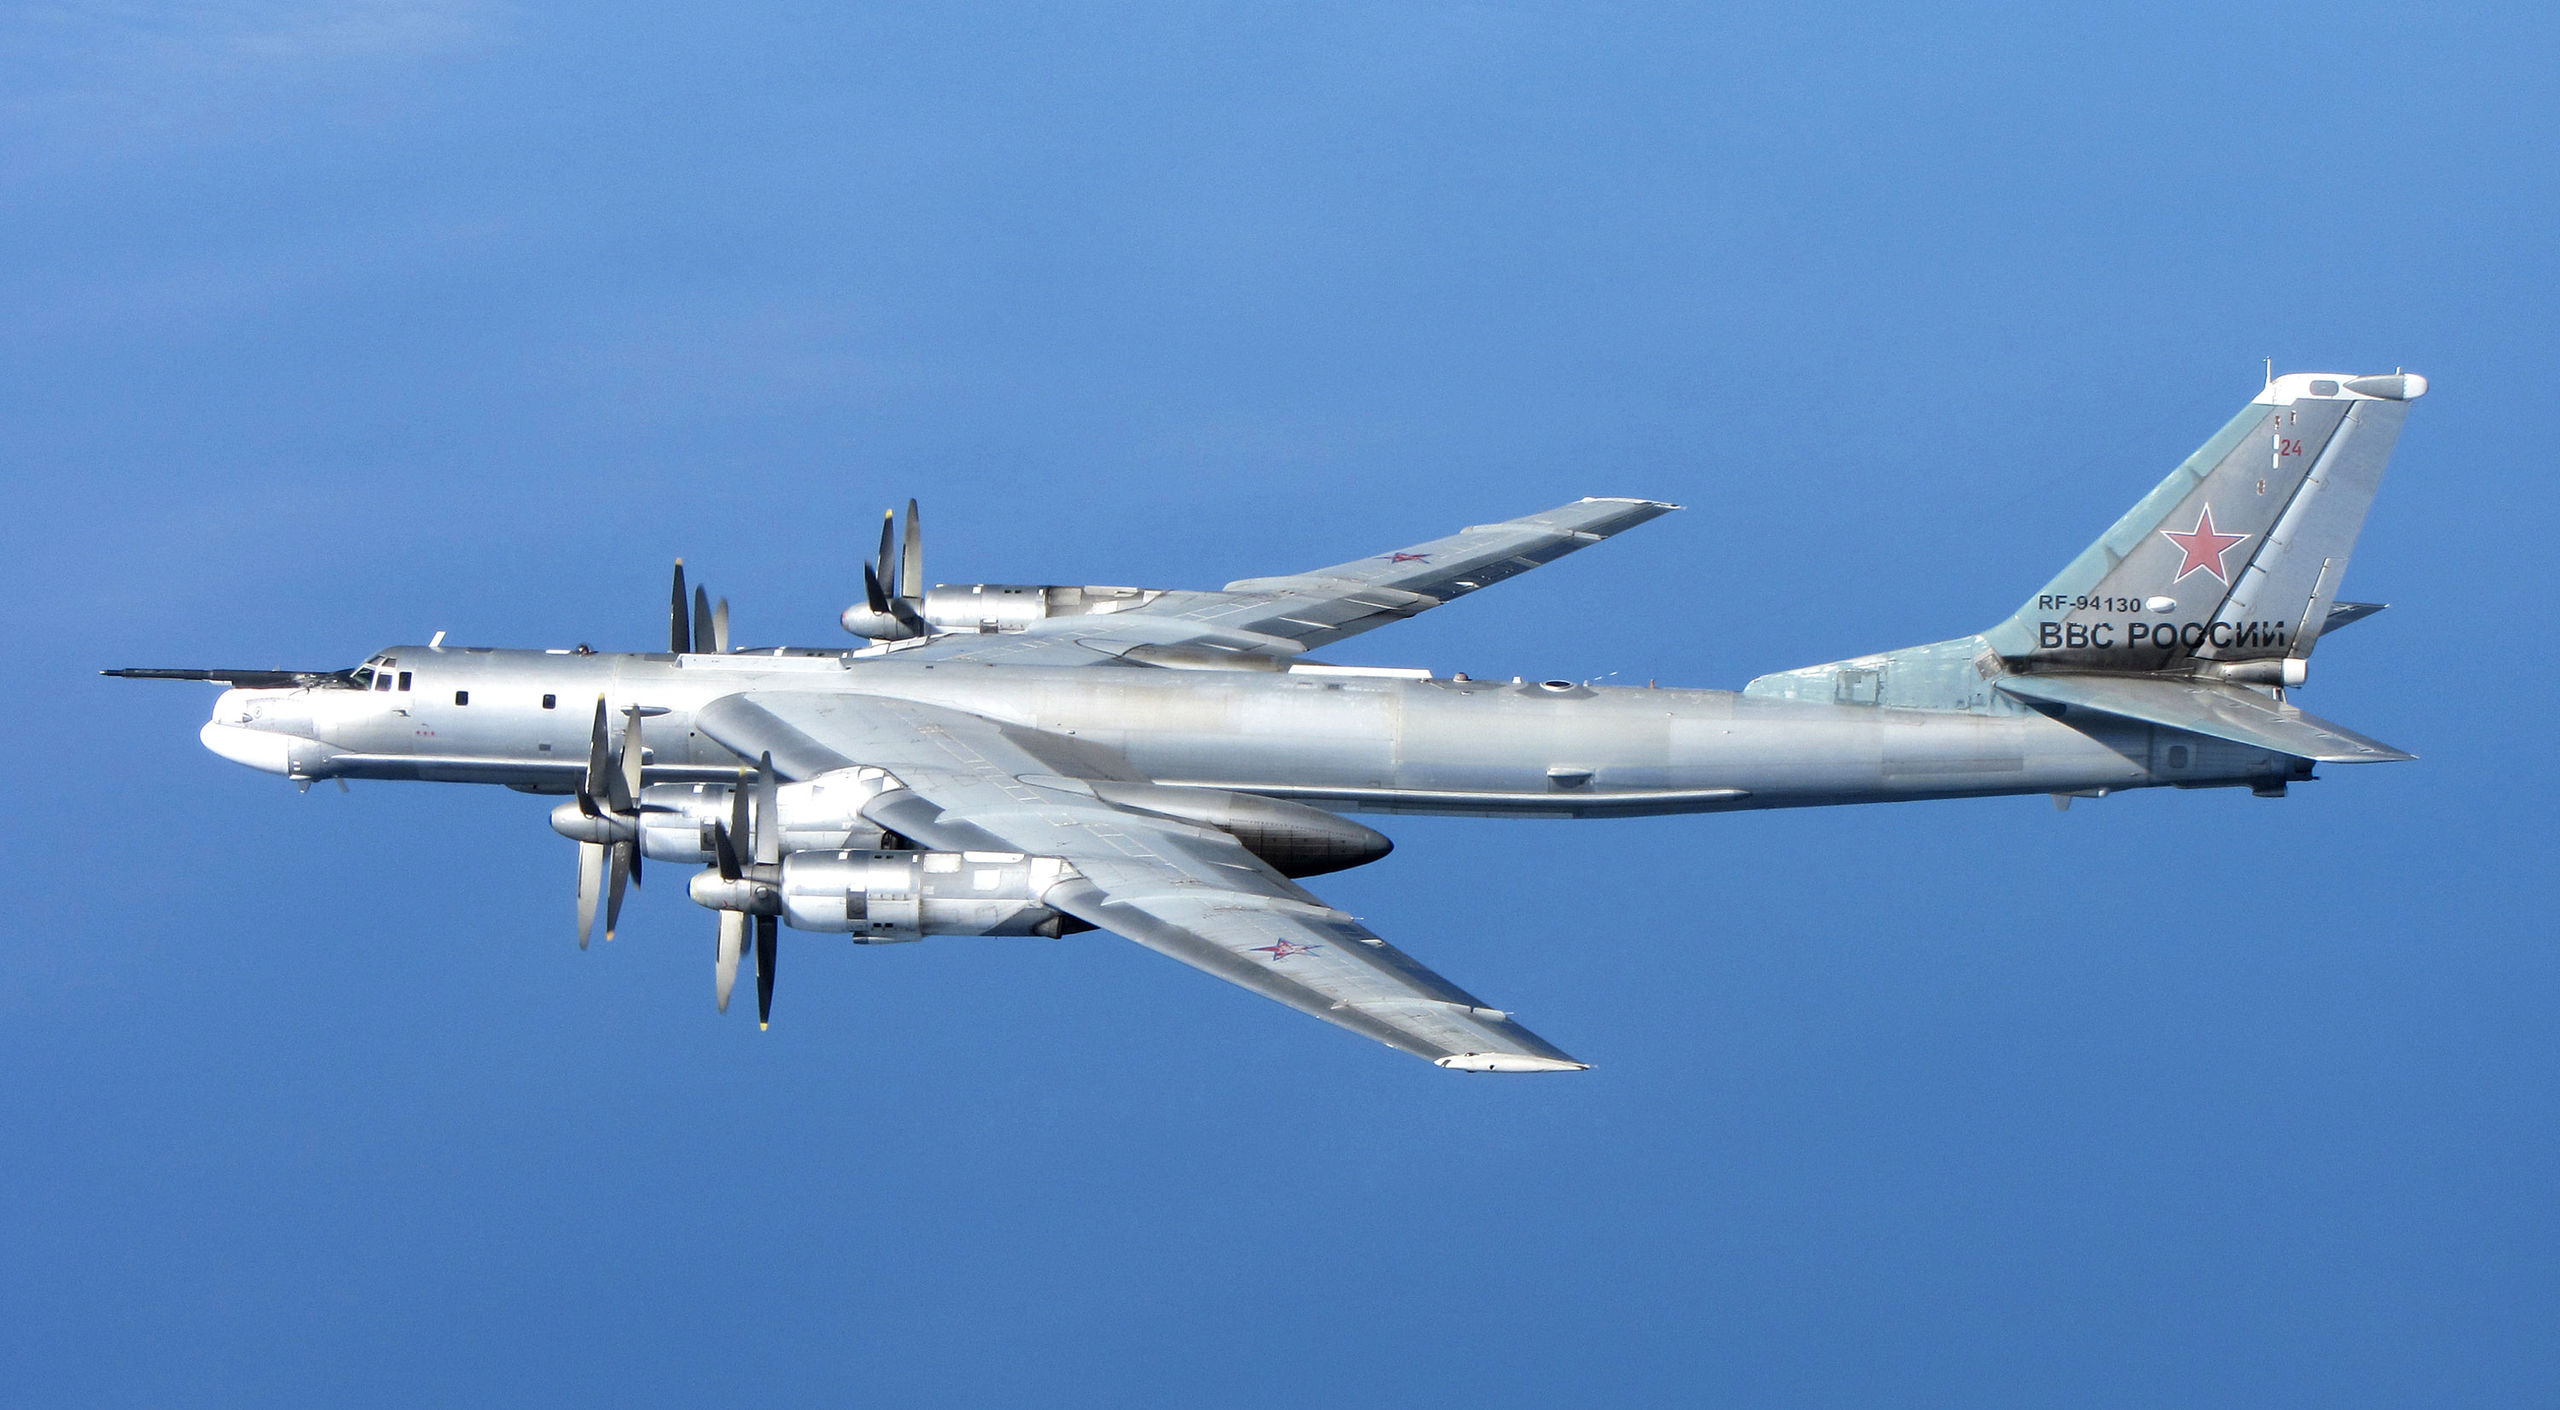 A Russian Tupolev Tu-95 Bear 'H' off the coast of Scotland in 2014. UK Royal Air Force Photo